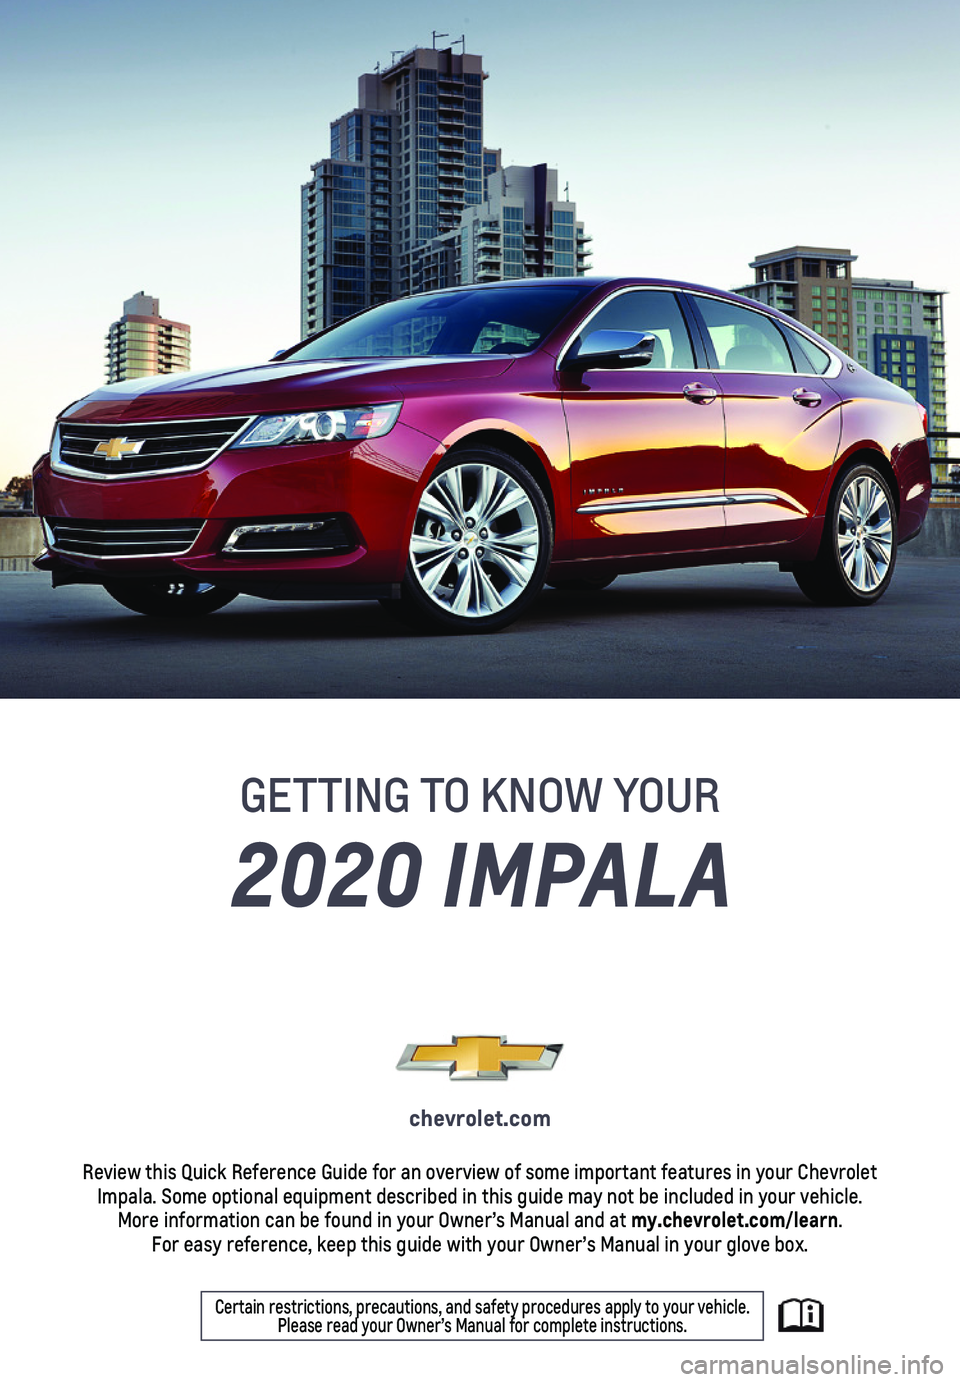 CHEVROLET IMPALA 2020  Get To Know Guide 1
chevrolet.com
Review this Quick Reference Guide for an overview of some important feat\
ures in your Chevrolet Impala. Some optional equipment described in this guide may not be inclu\
ded in your v